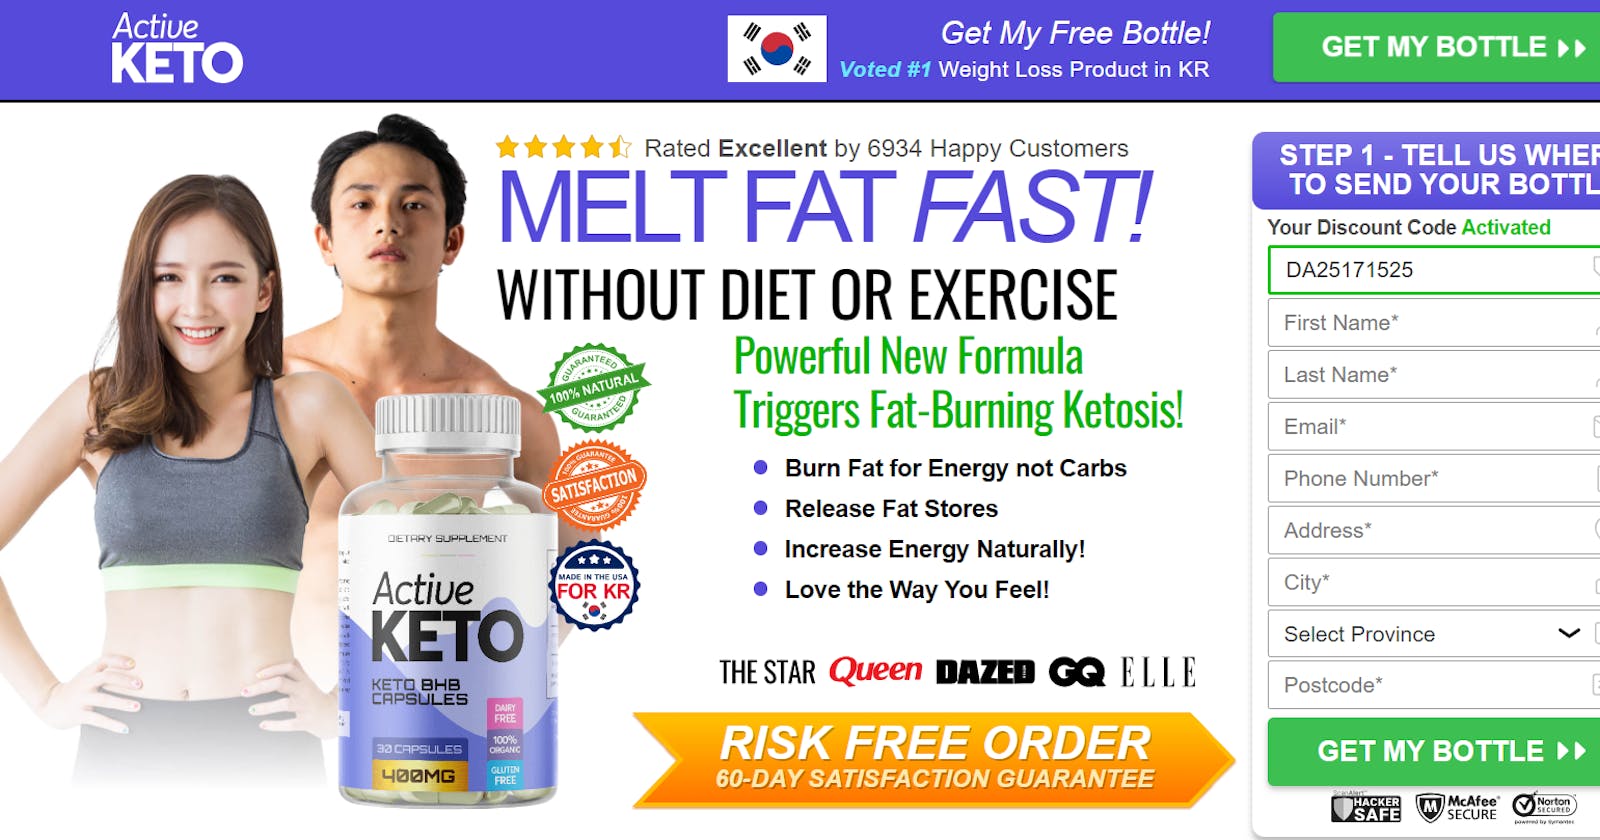 Boost Your Energy and Shed Pounds with Active Keto Capsules KR!